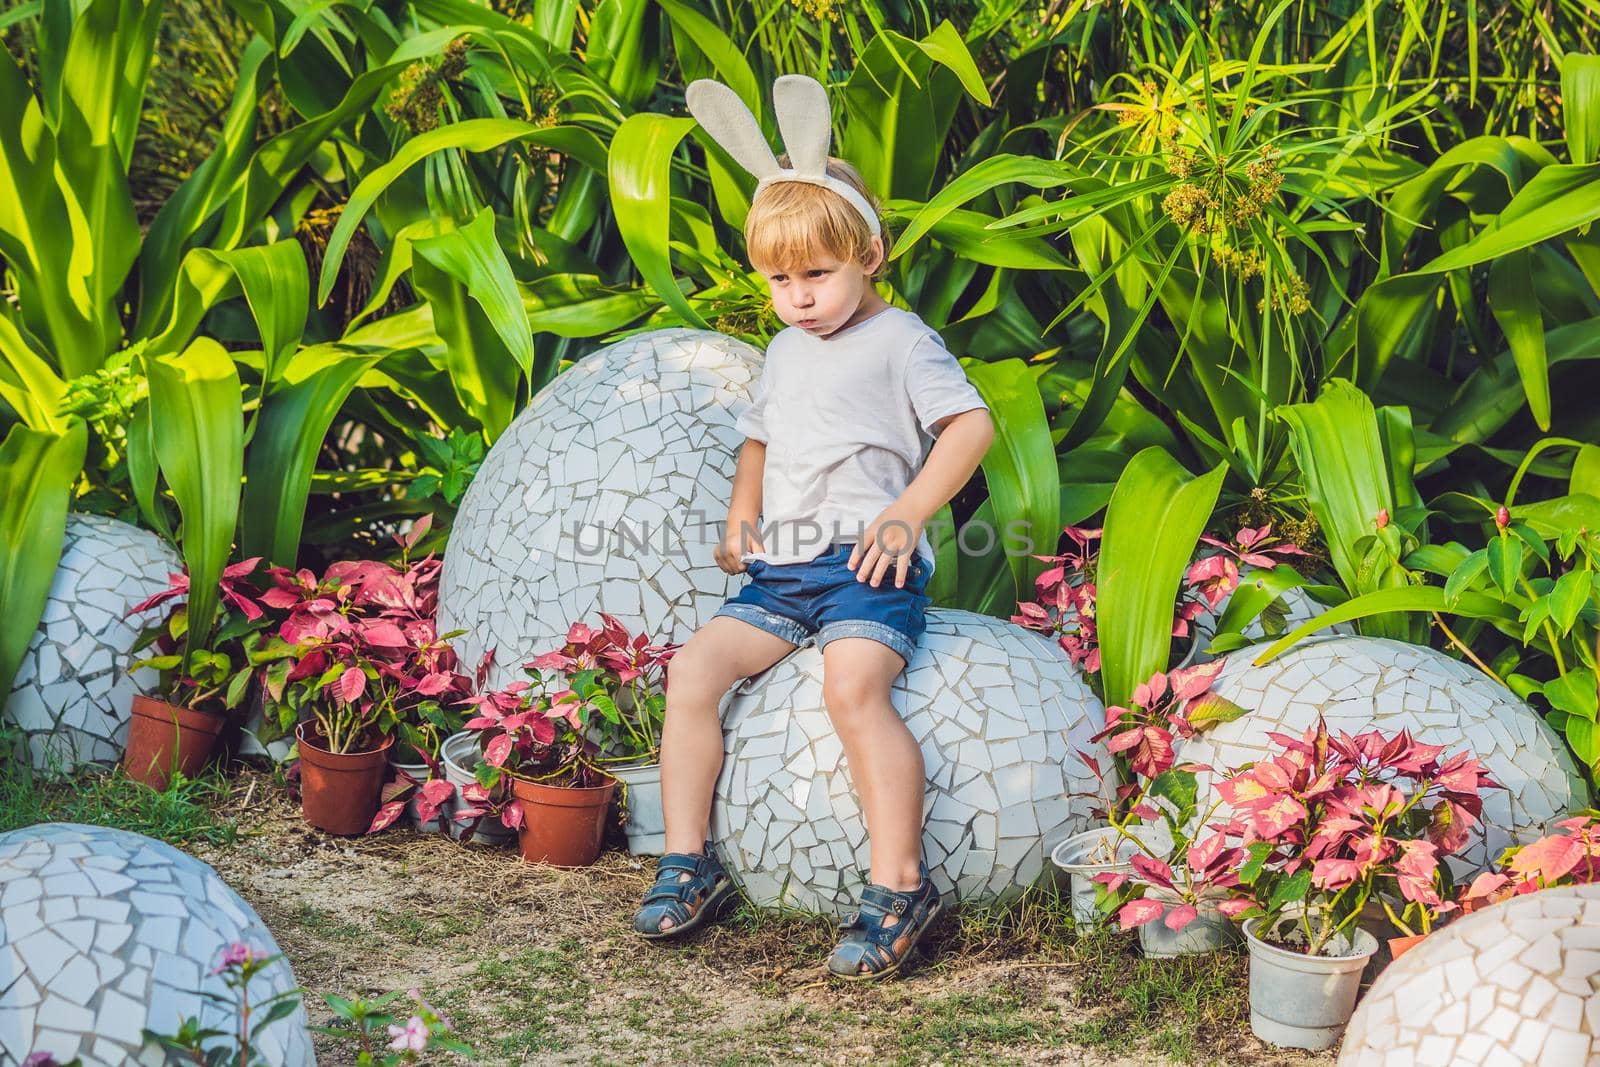 Cute little kid boy with bunny ears having fun with traditional Easter eggs hunt, outdoors. Celebrating Easter holiday. Toddler finding, colorful eggs.